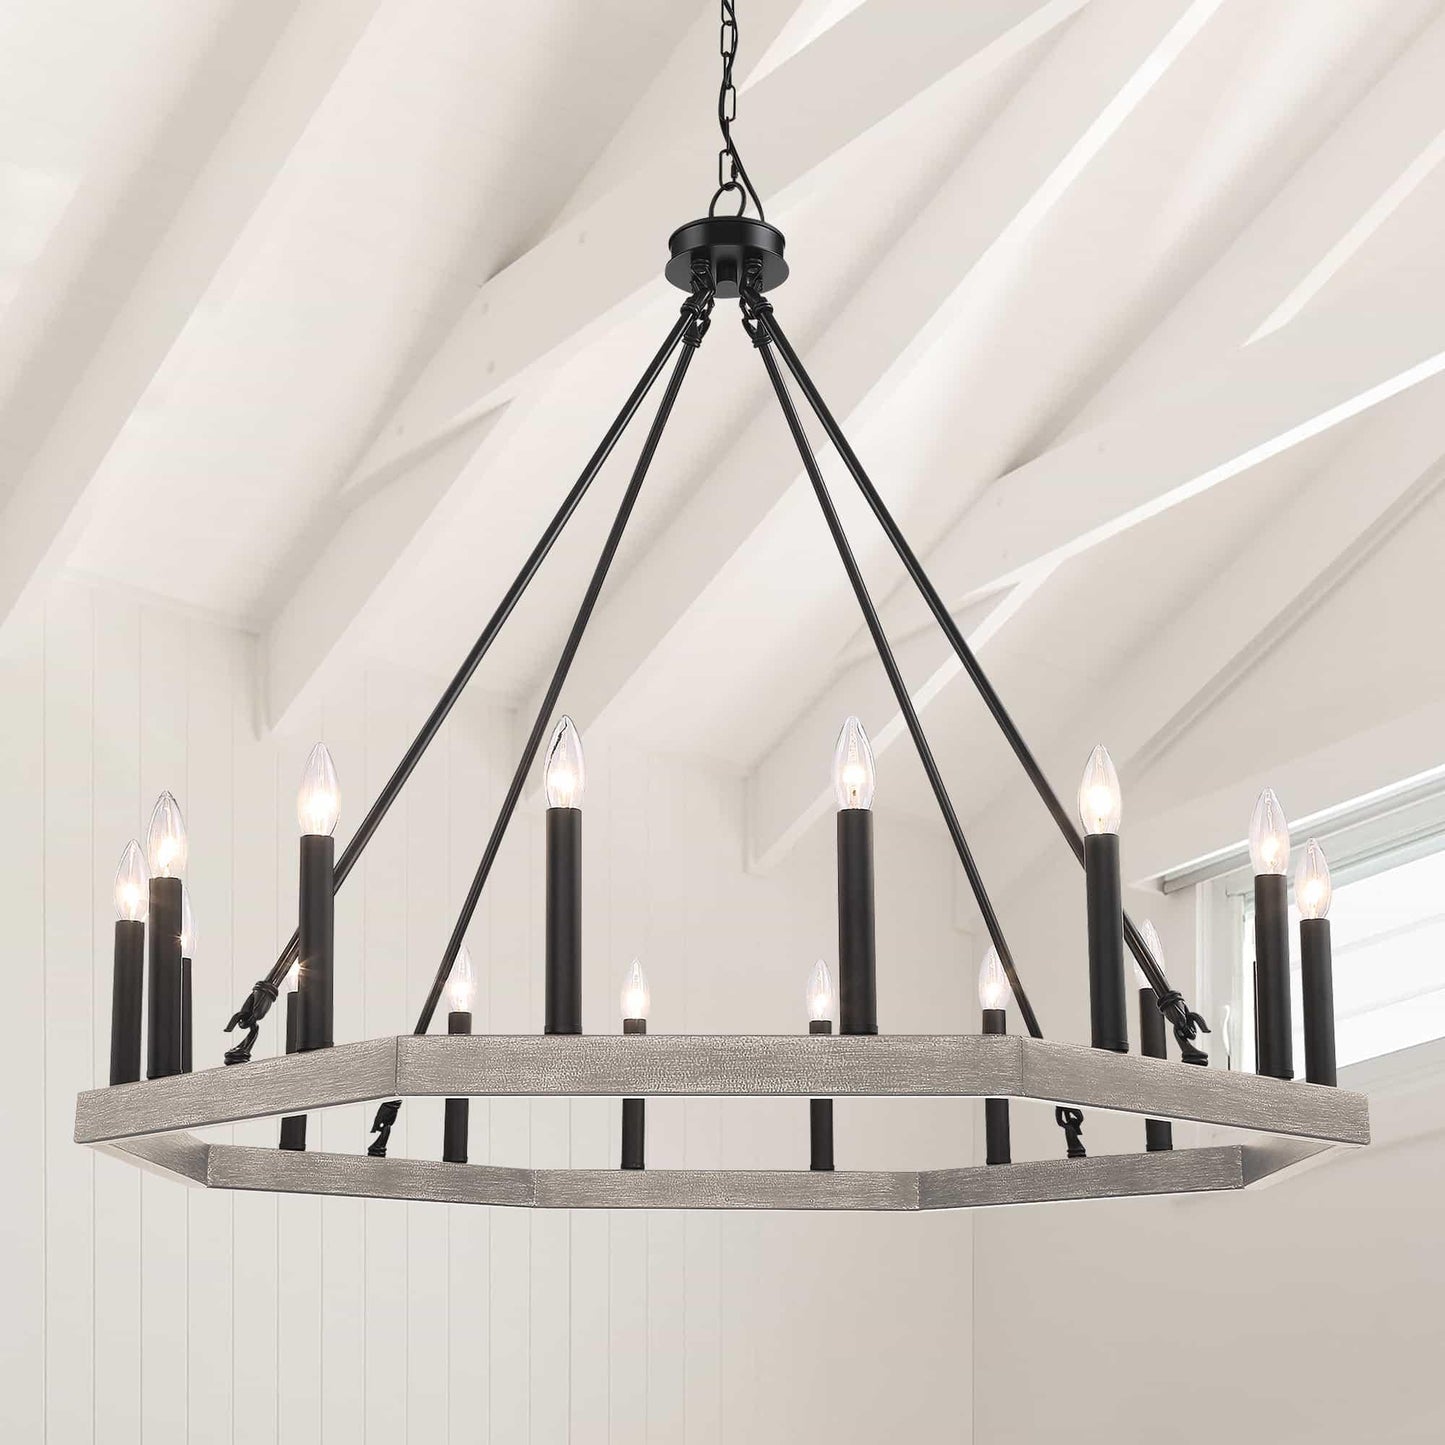 16 light candle style wagon wheel chandelier 1 (27) by ACROMA